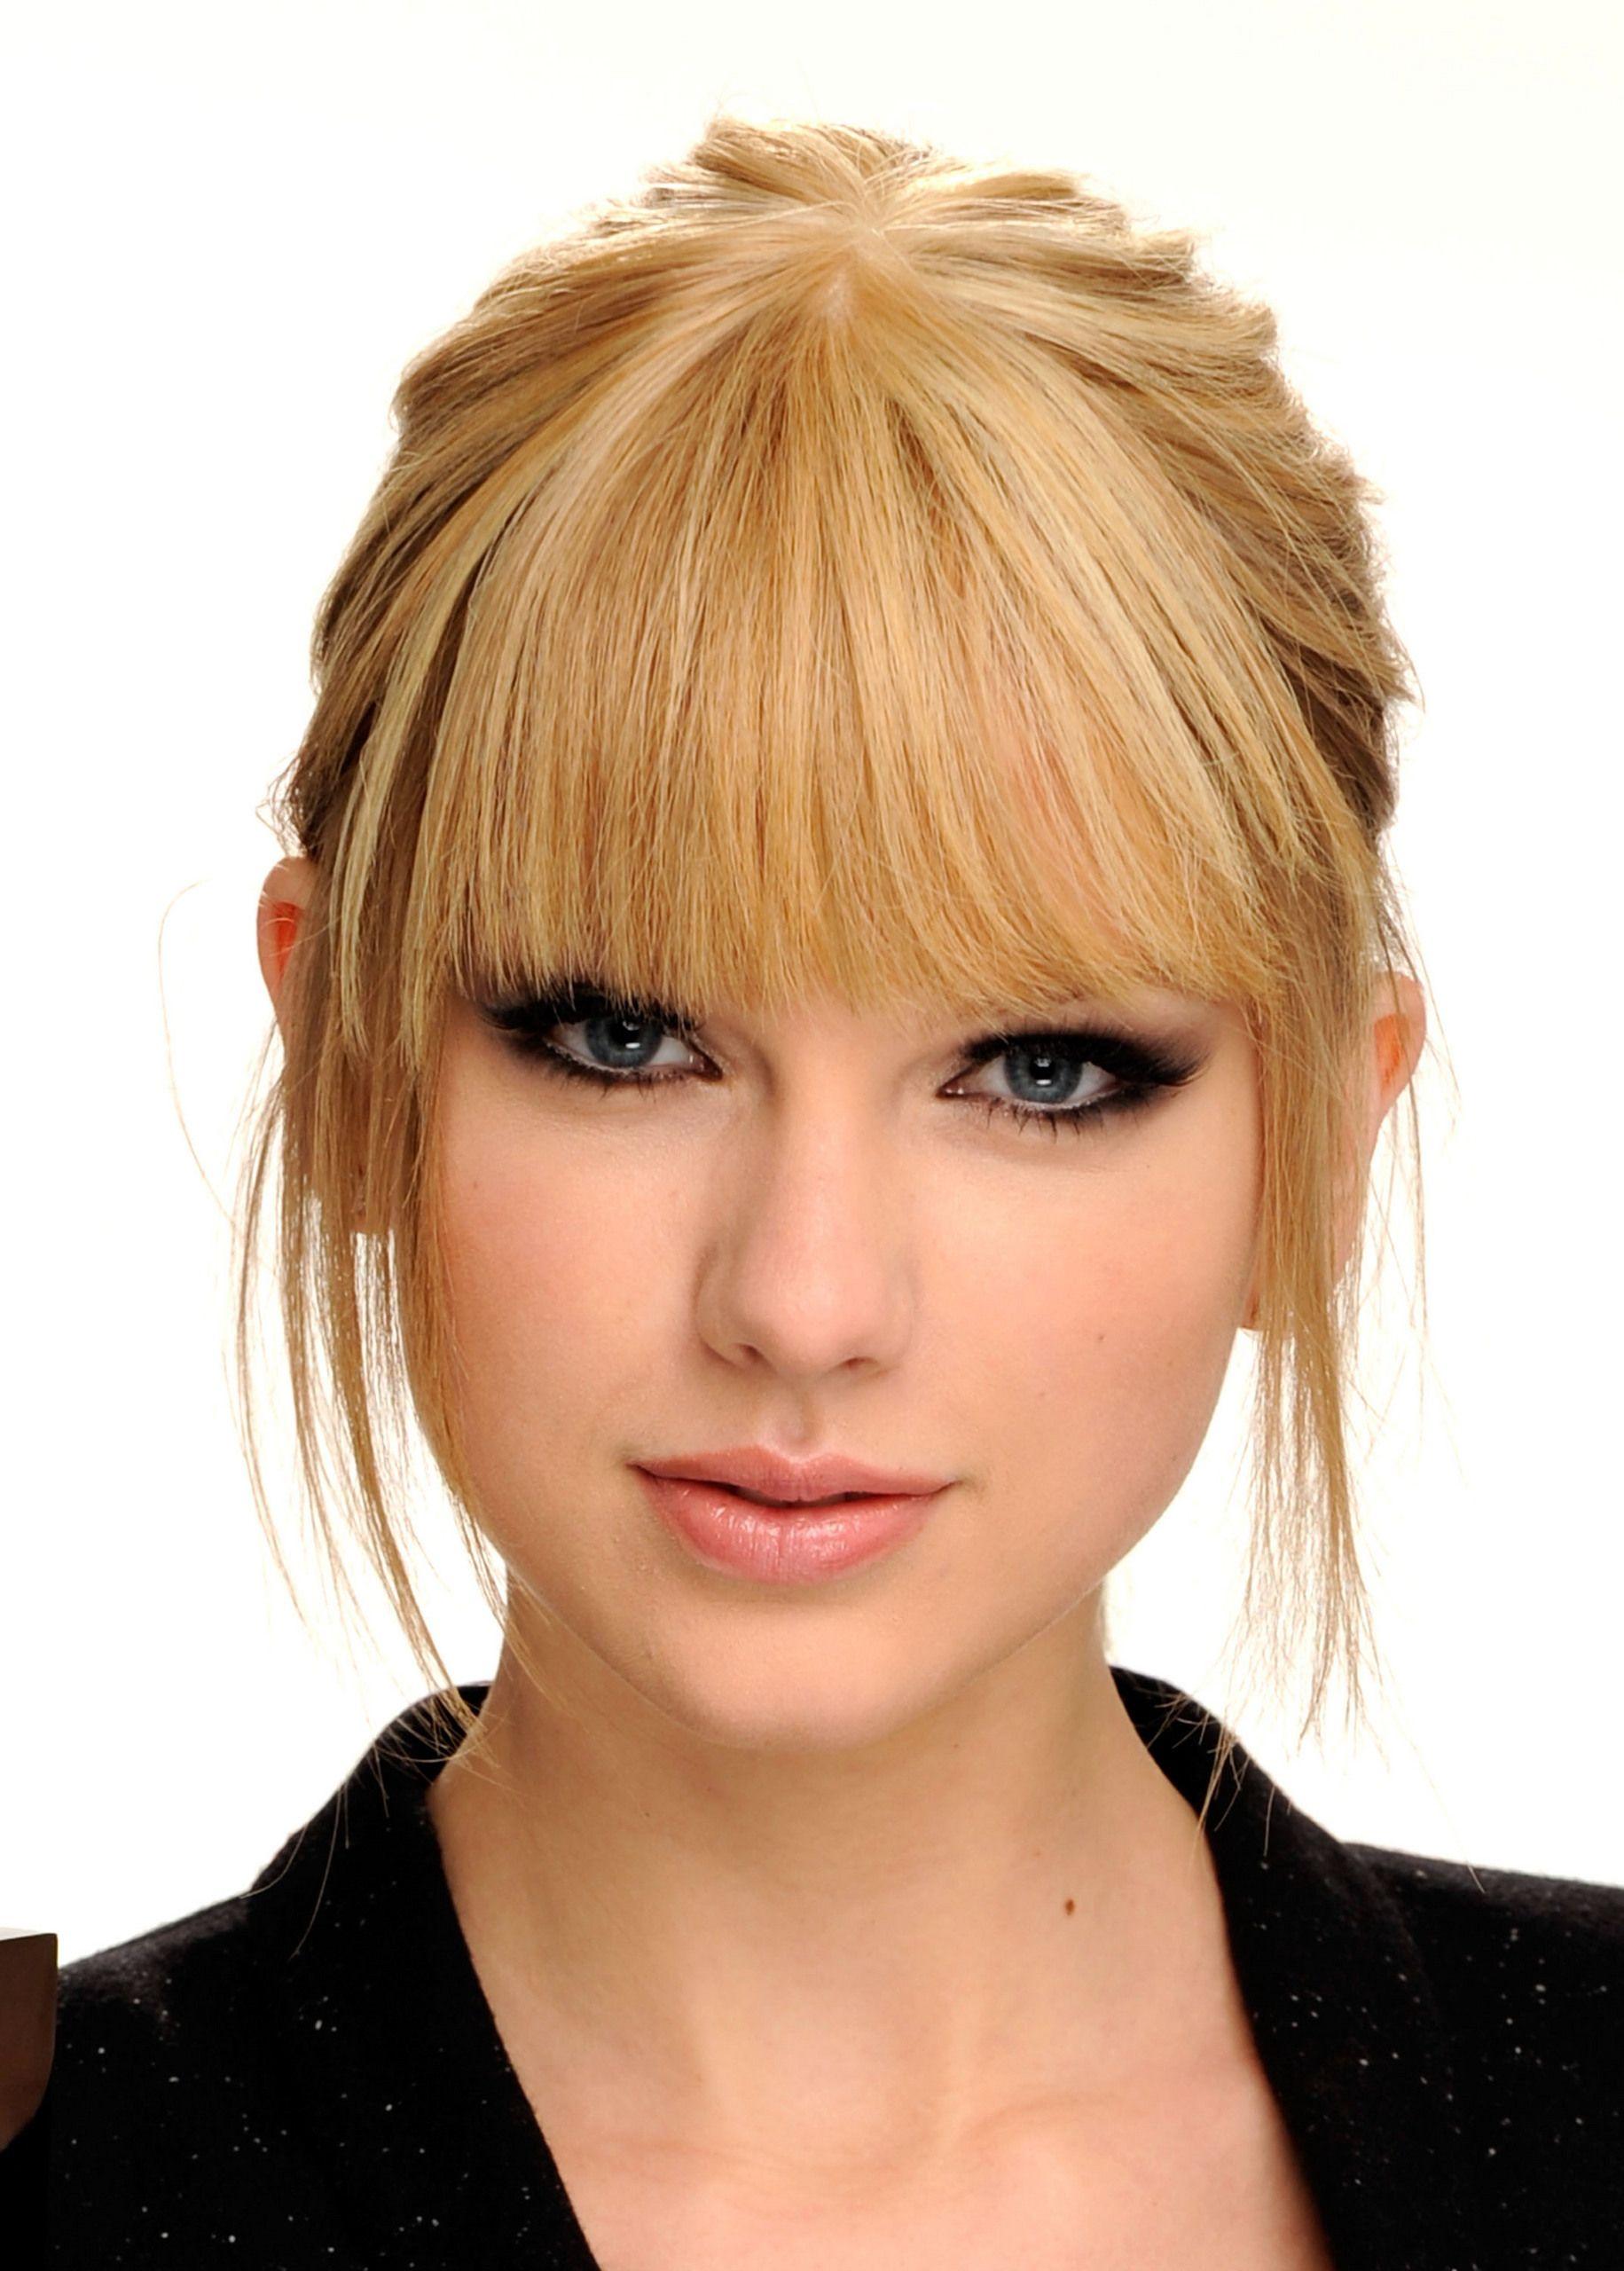 Taylor swift best hairstyle